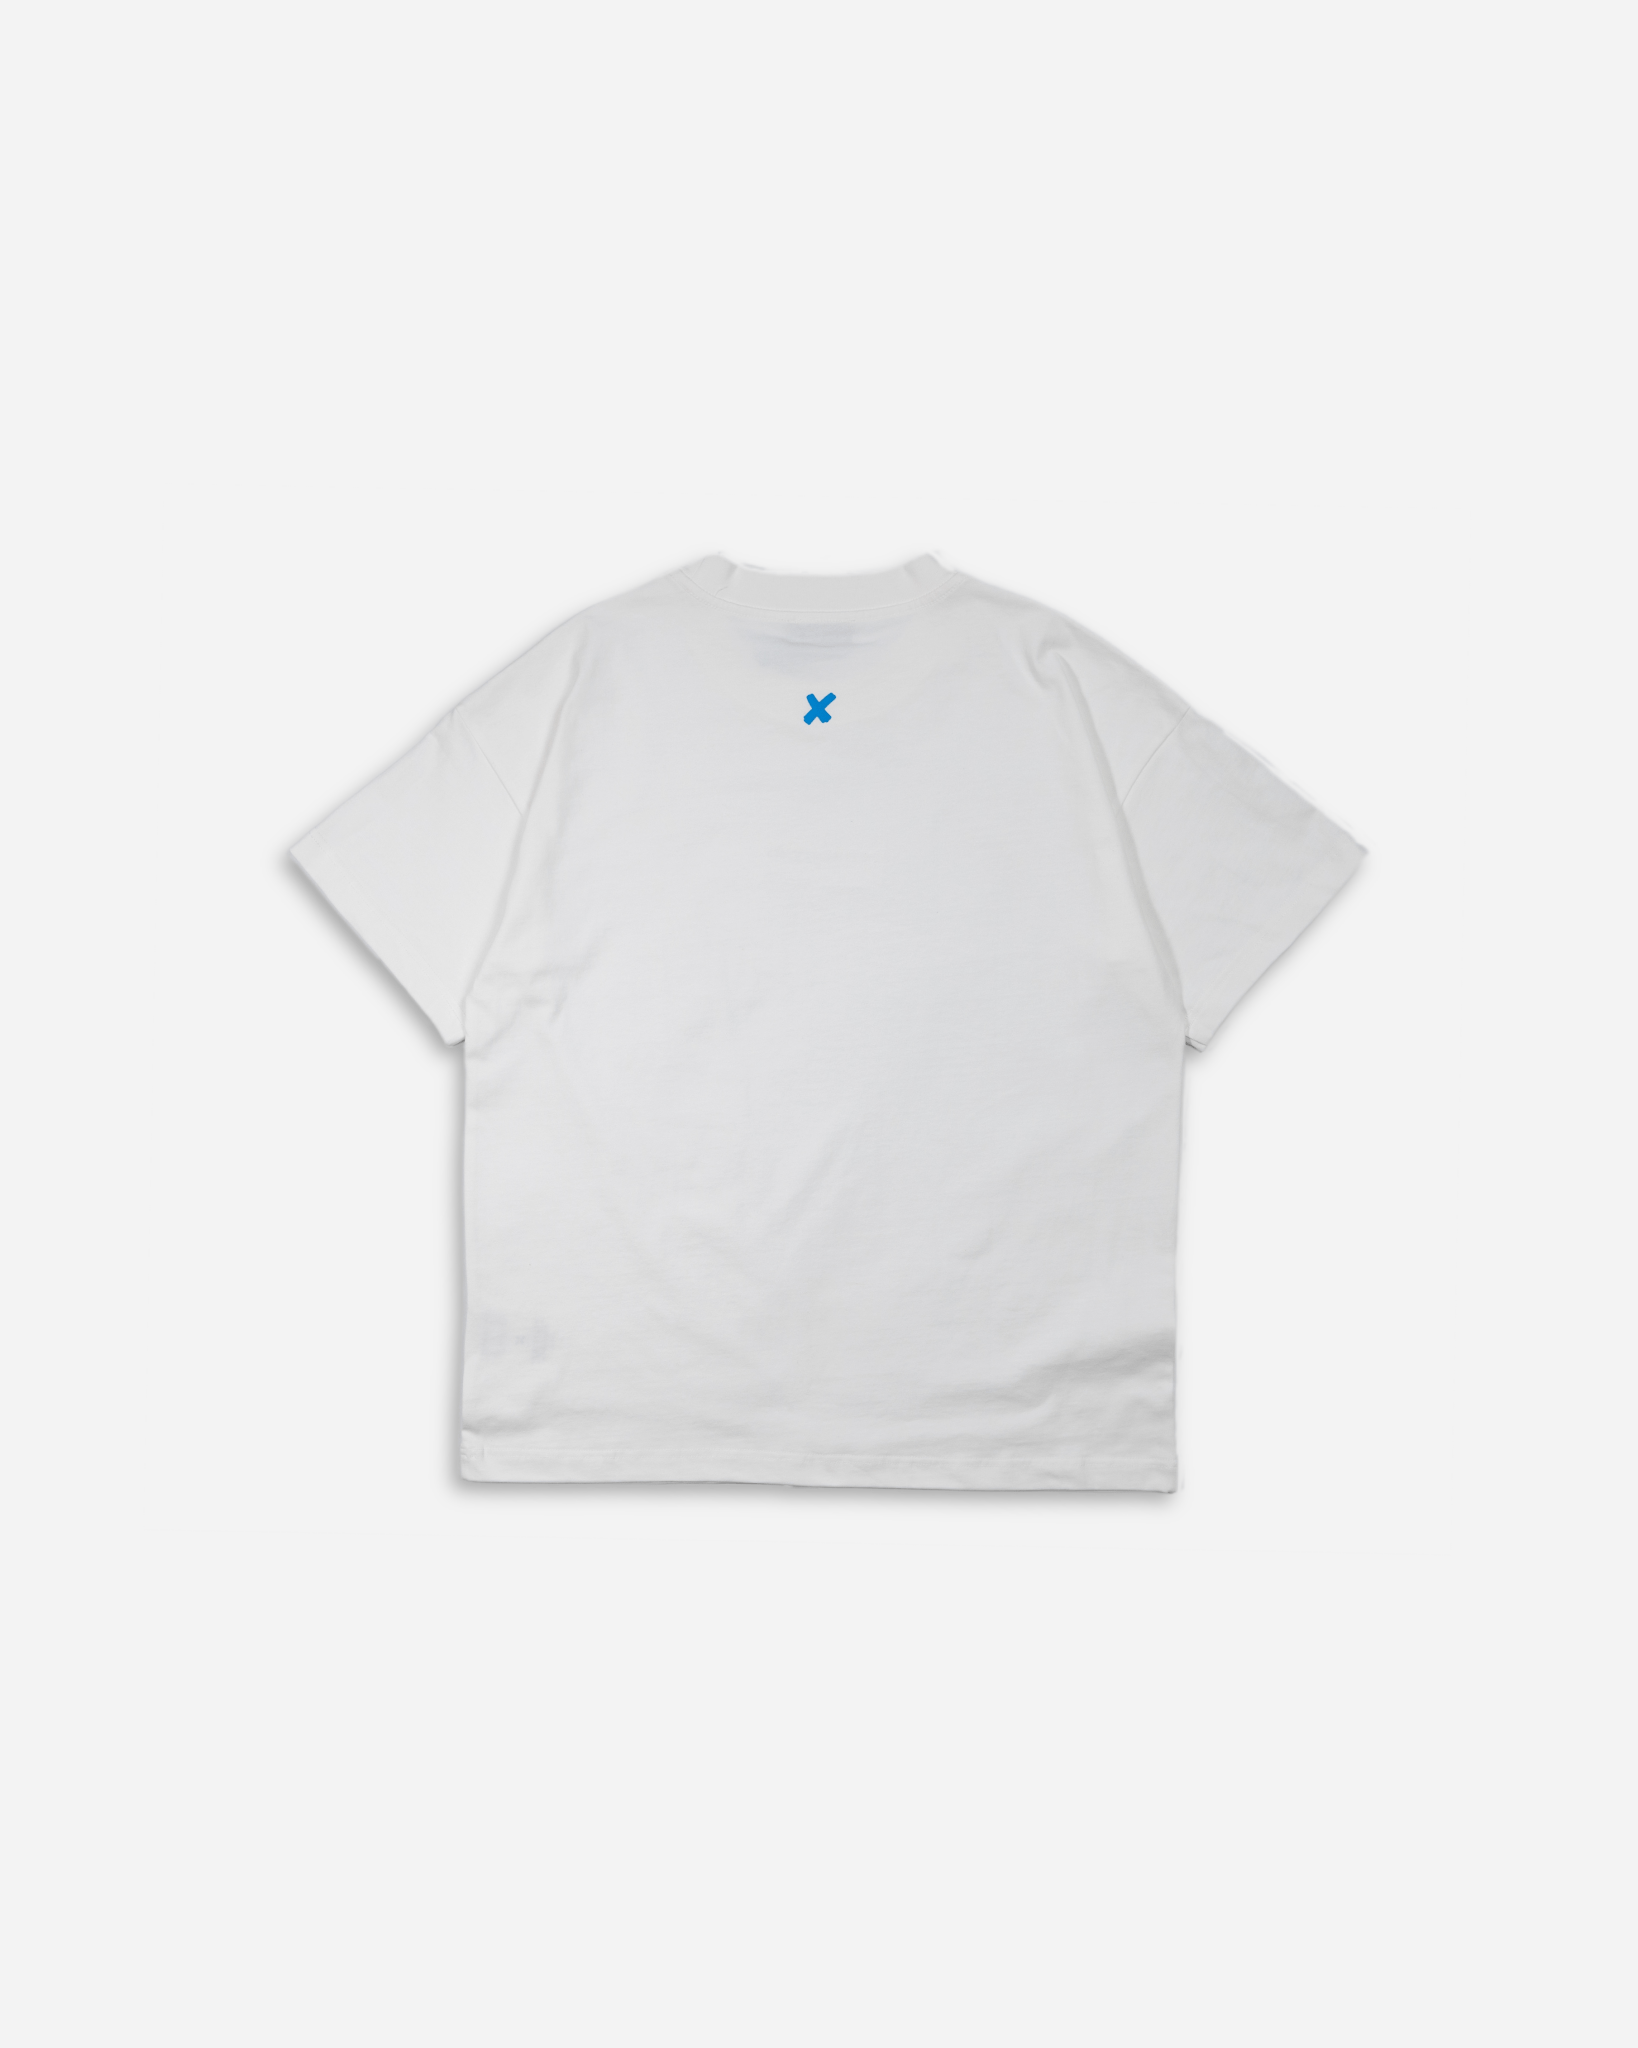 EMBOSSED LOGO T-SHIRT - Unsorted x